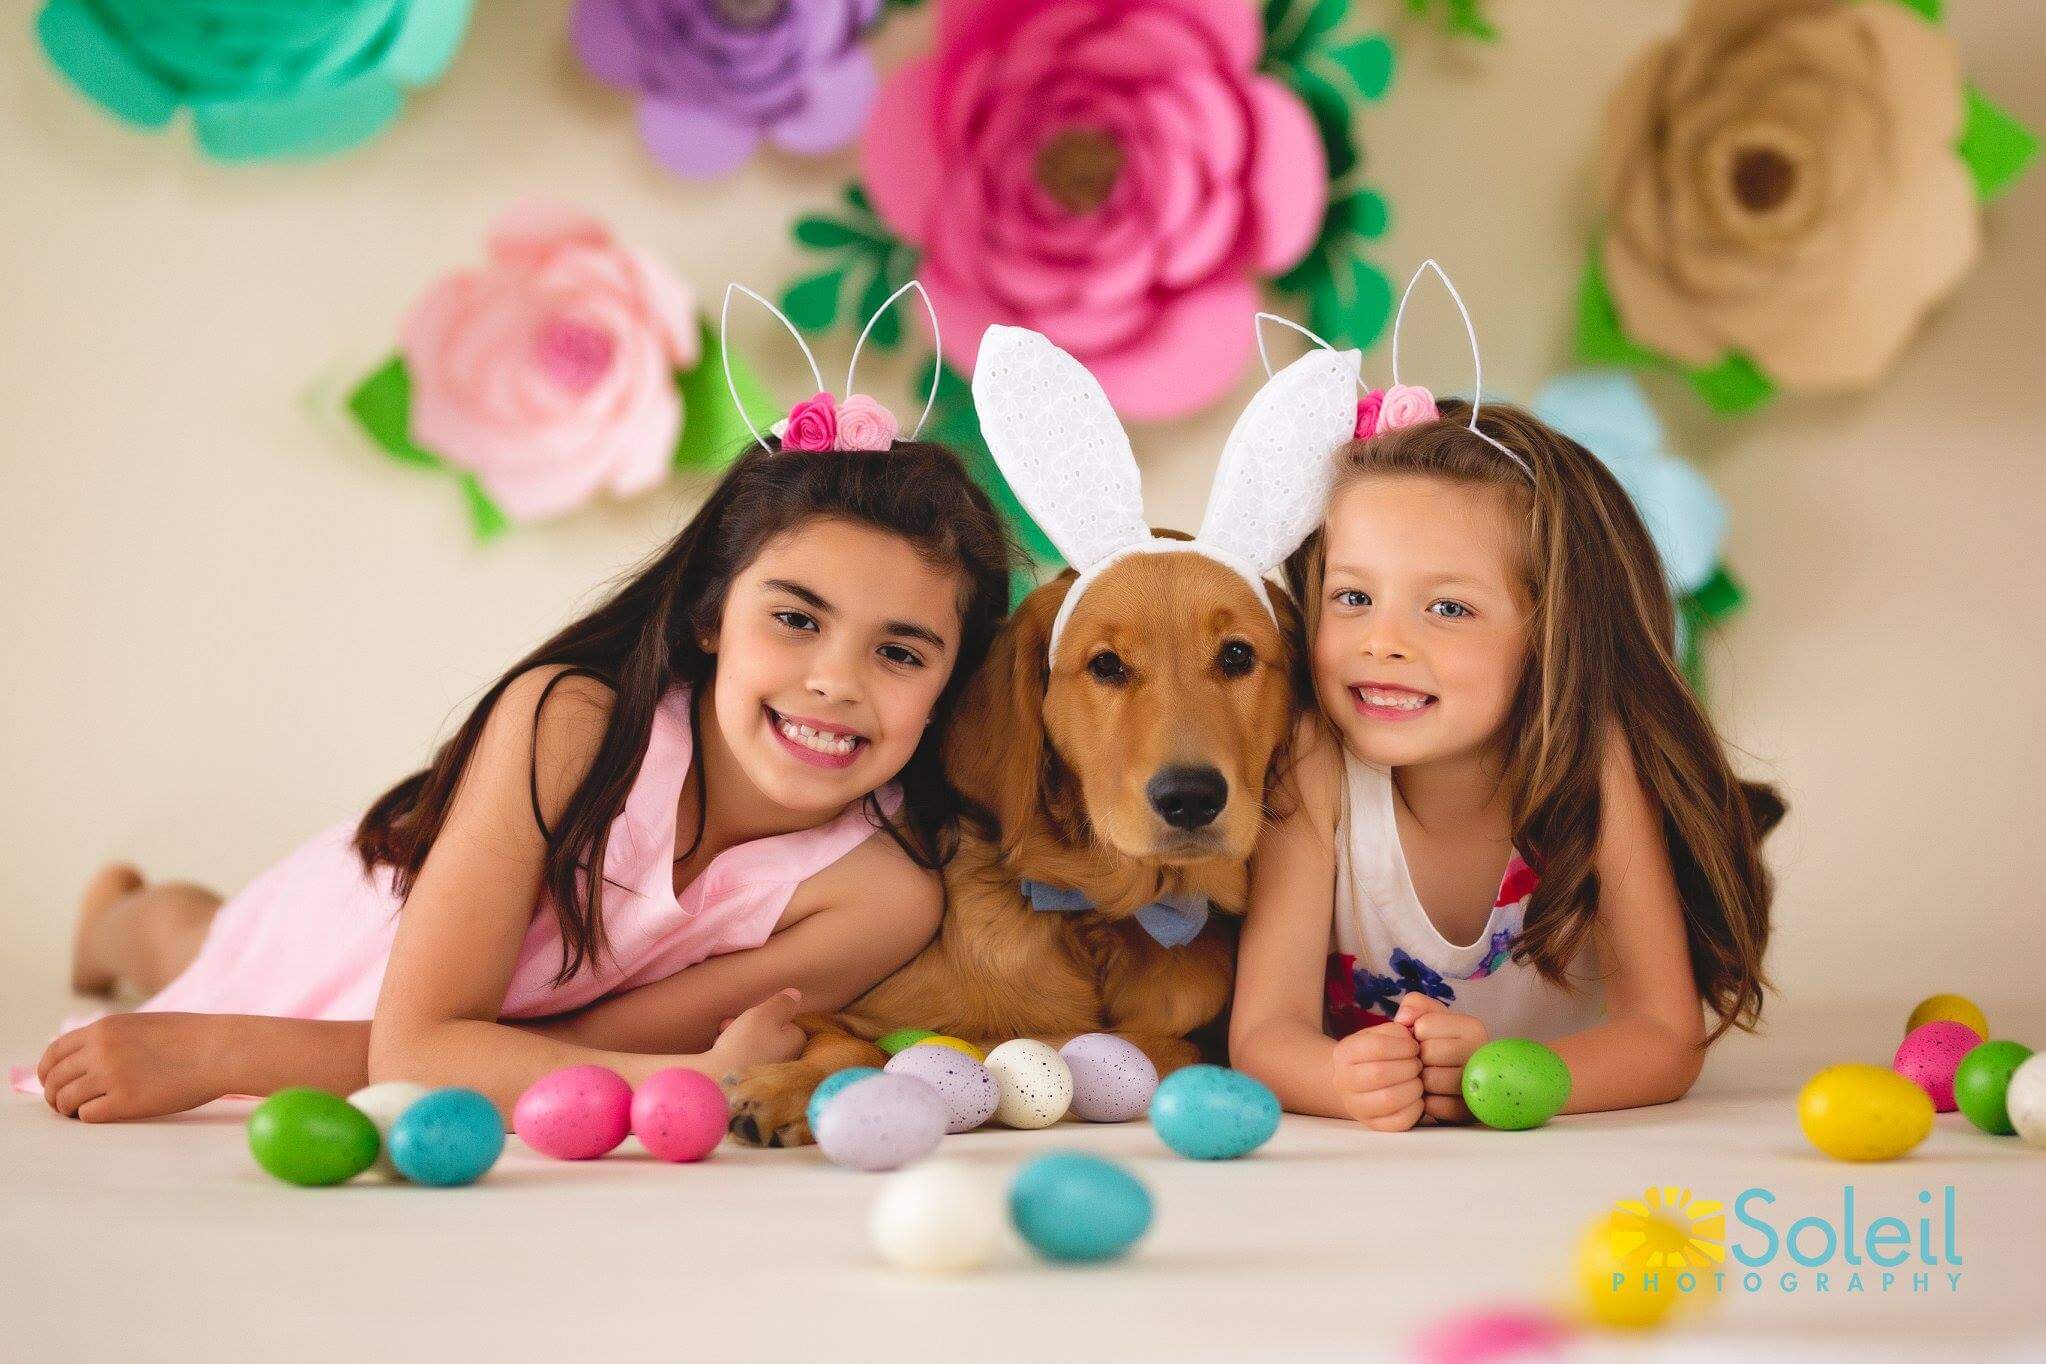 Two young girls wearing Easter bunny ears post with their pet dog, also wearing a pair of Easter bunny ears. In the background, giant paper flowers hang on a white wall. Easter eggs are scattered on the floor around the girls and dog.